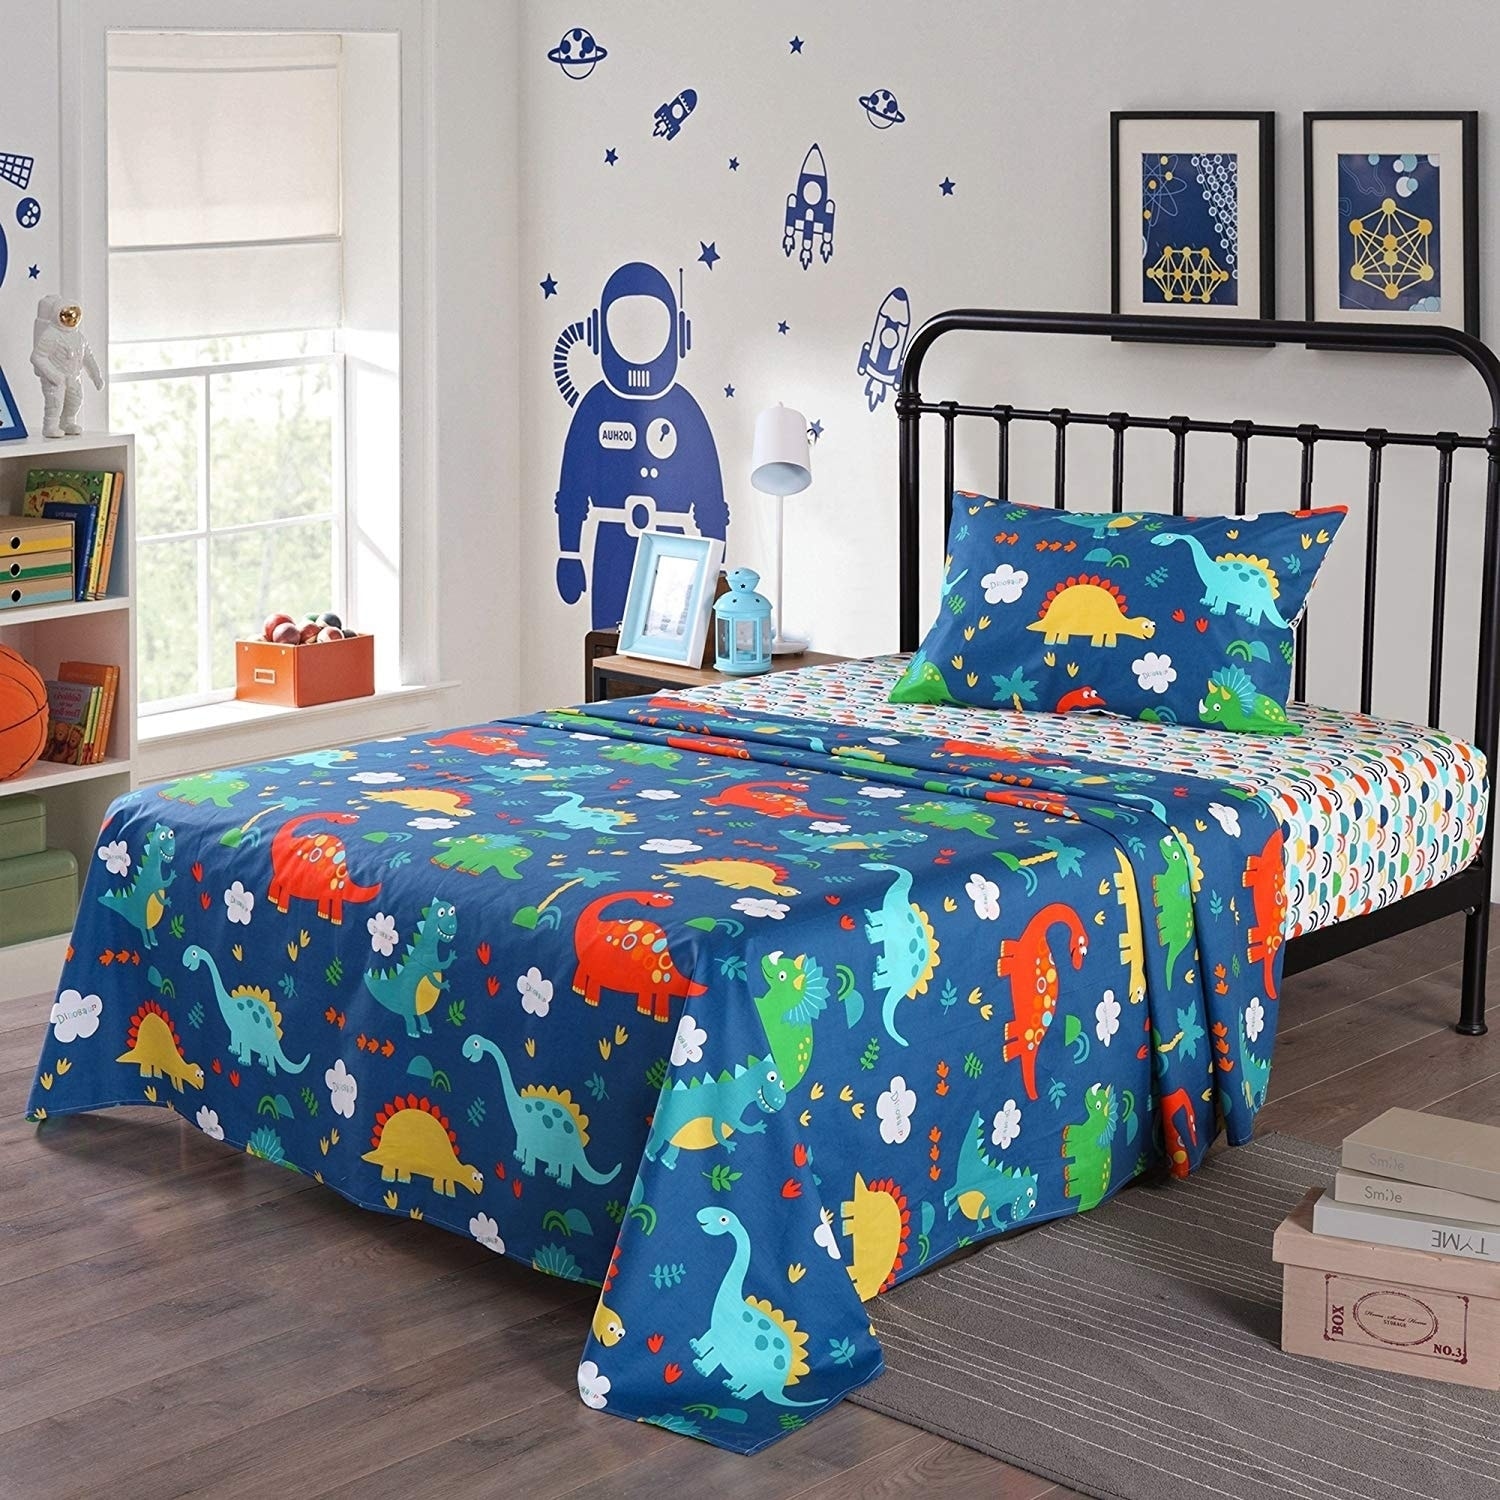 Twin Size Kids Sheets Fun Bed Sheets for Children Toddlers Sheets for Twin Beds Toddler Sheets Kids Sheets Teen Bed Sheet Set Boys Sheets Fun Toddler Sheets Dinosaur Sheet Set Fun Kids Sheets 